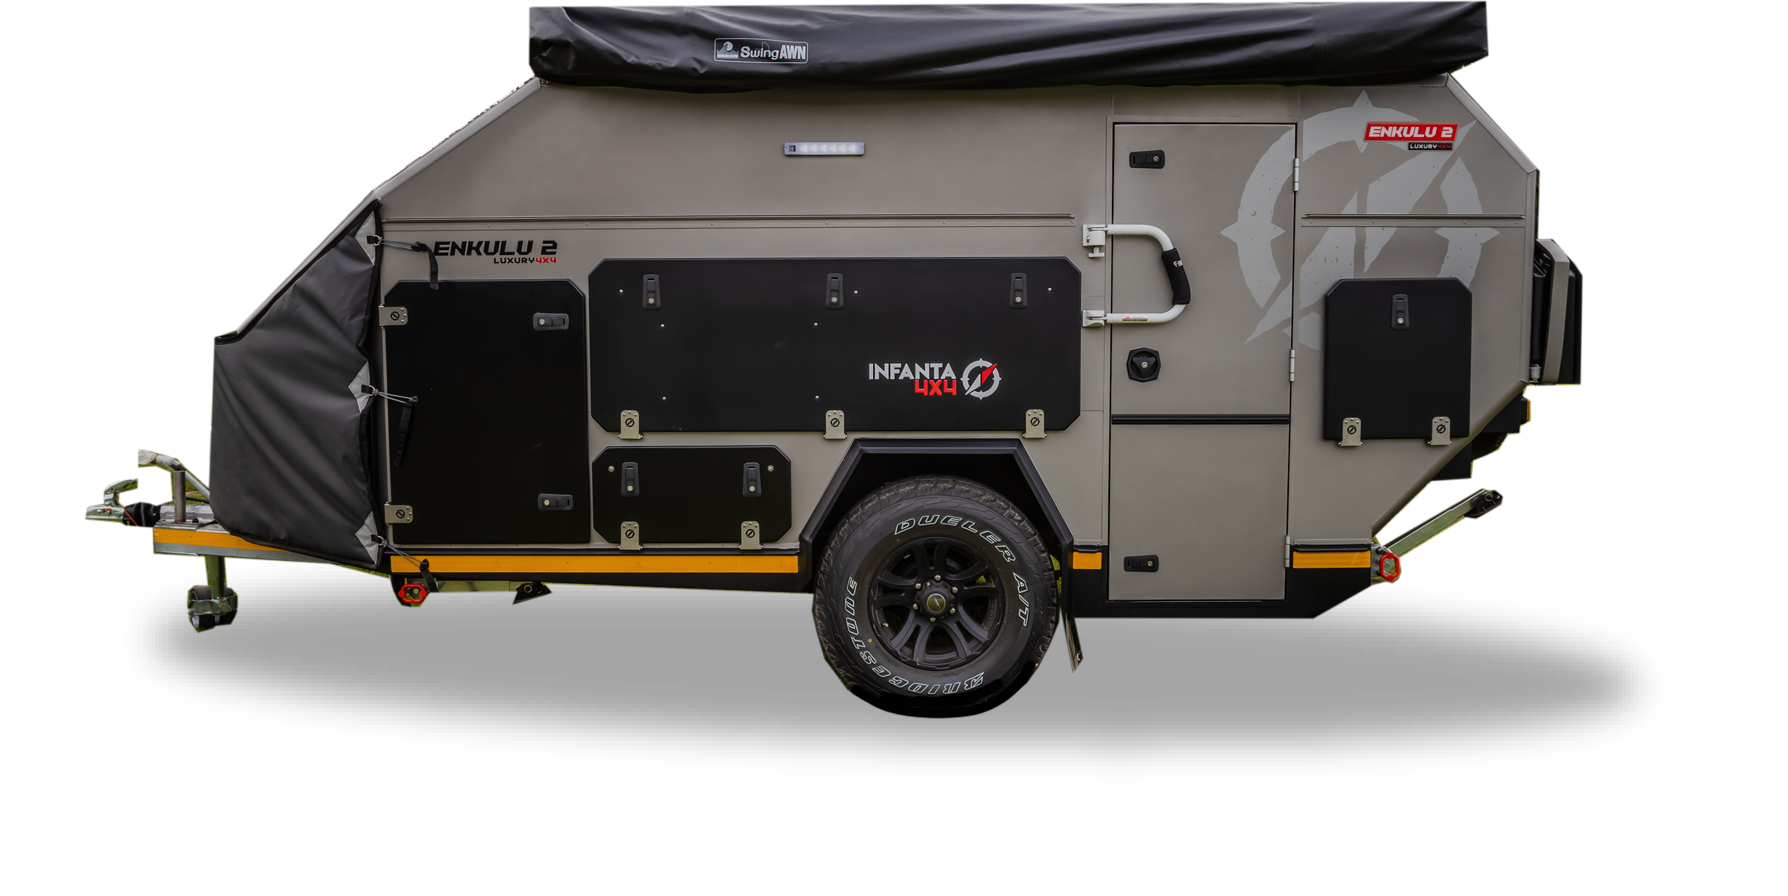 LIGHT WEIGHT RUGGED ALL TERRAIN MOBILE HOME